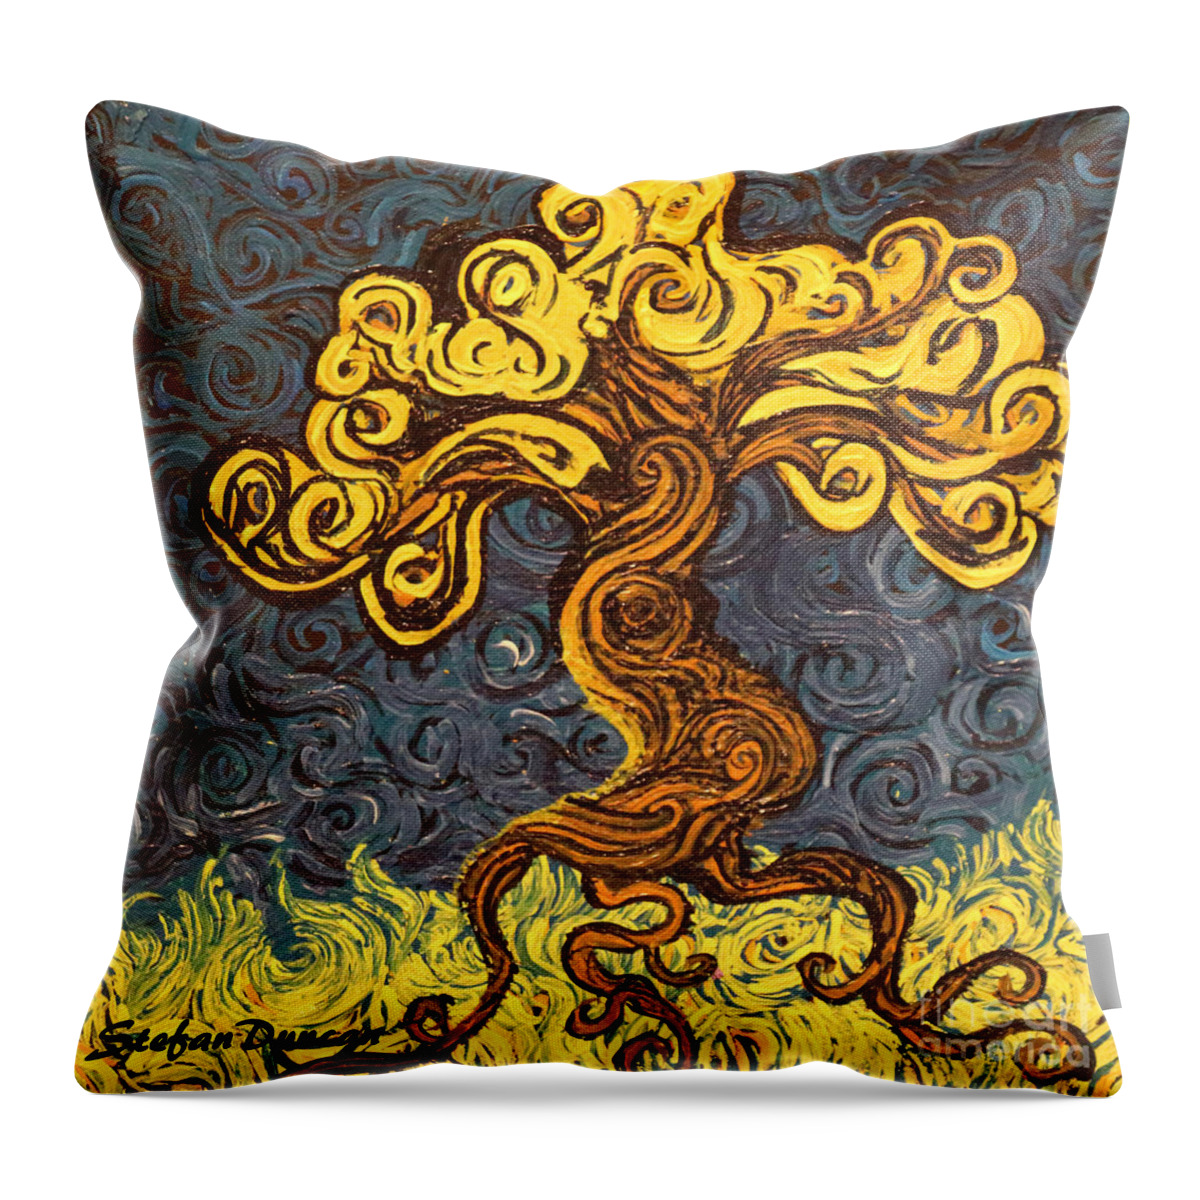 Impressionism Throw Pillow featuring the painting Radiant Within by Stefan Duncan